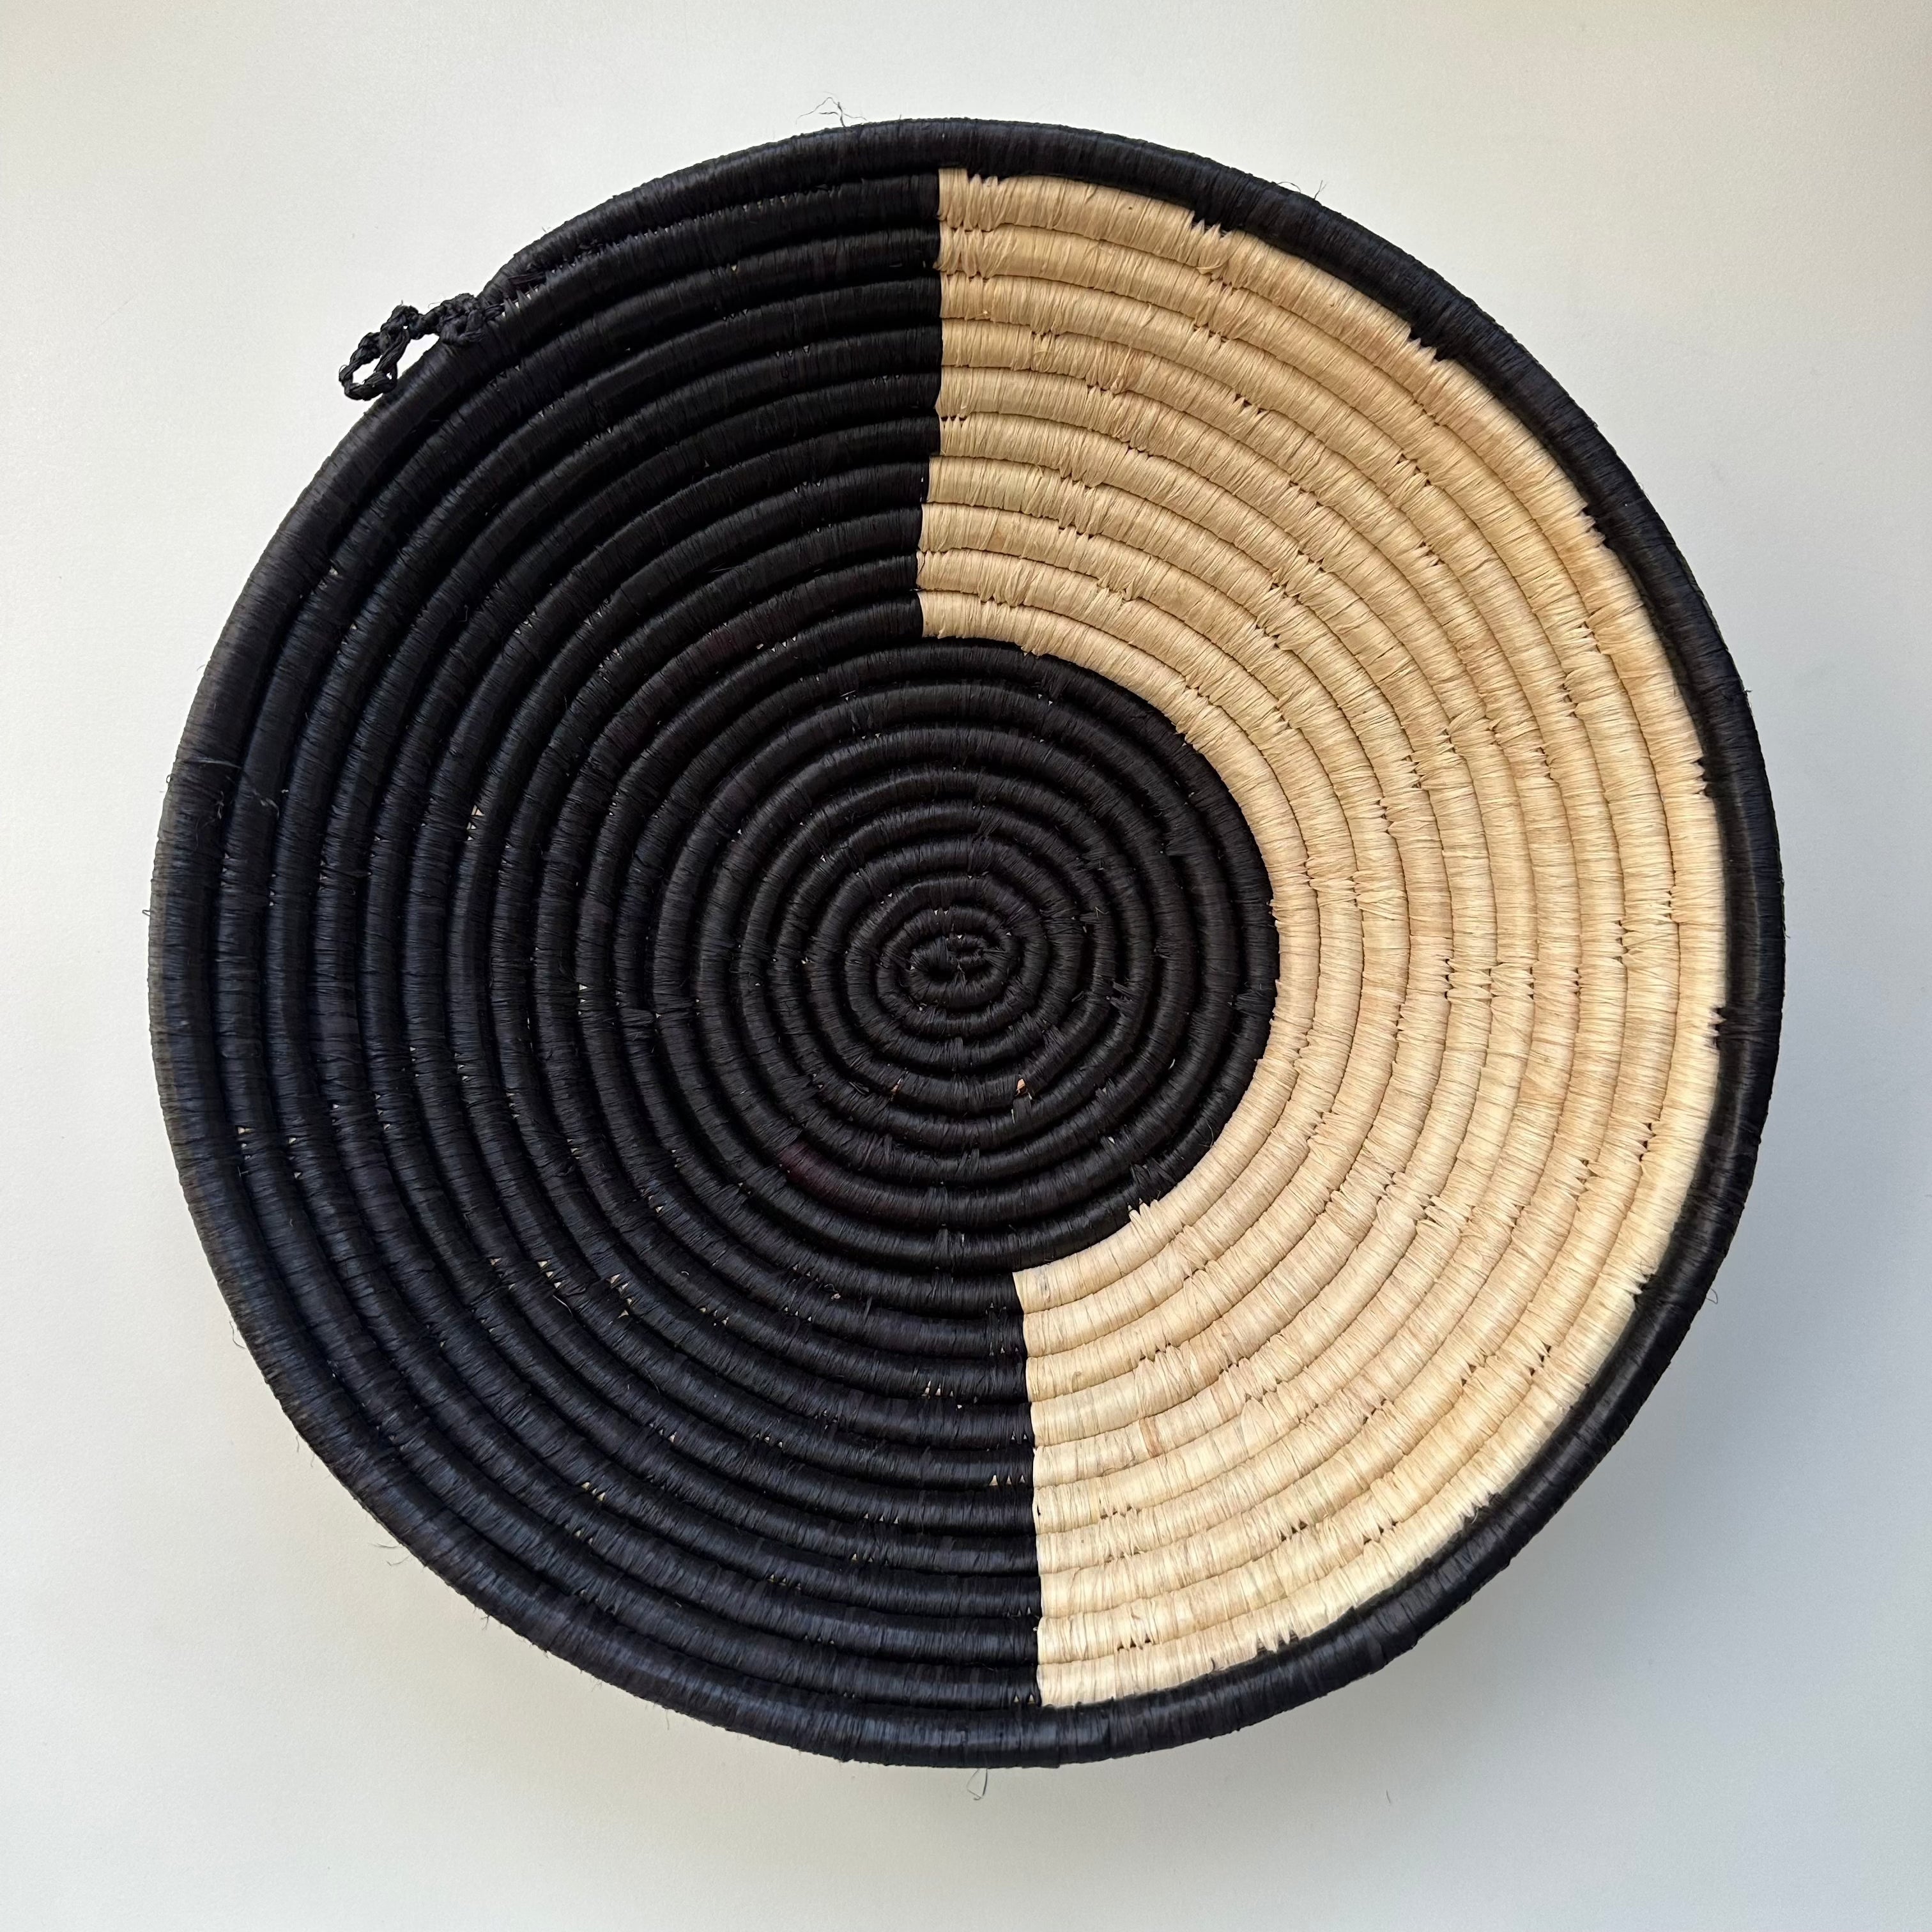 The display of black and natural color handwoven bowl